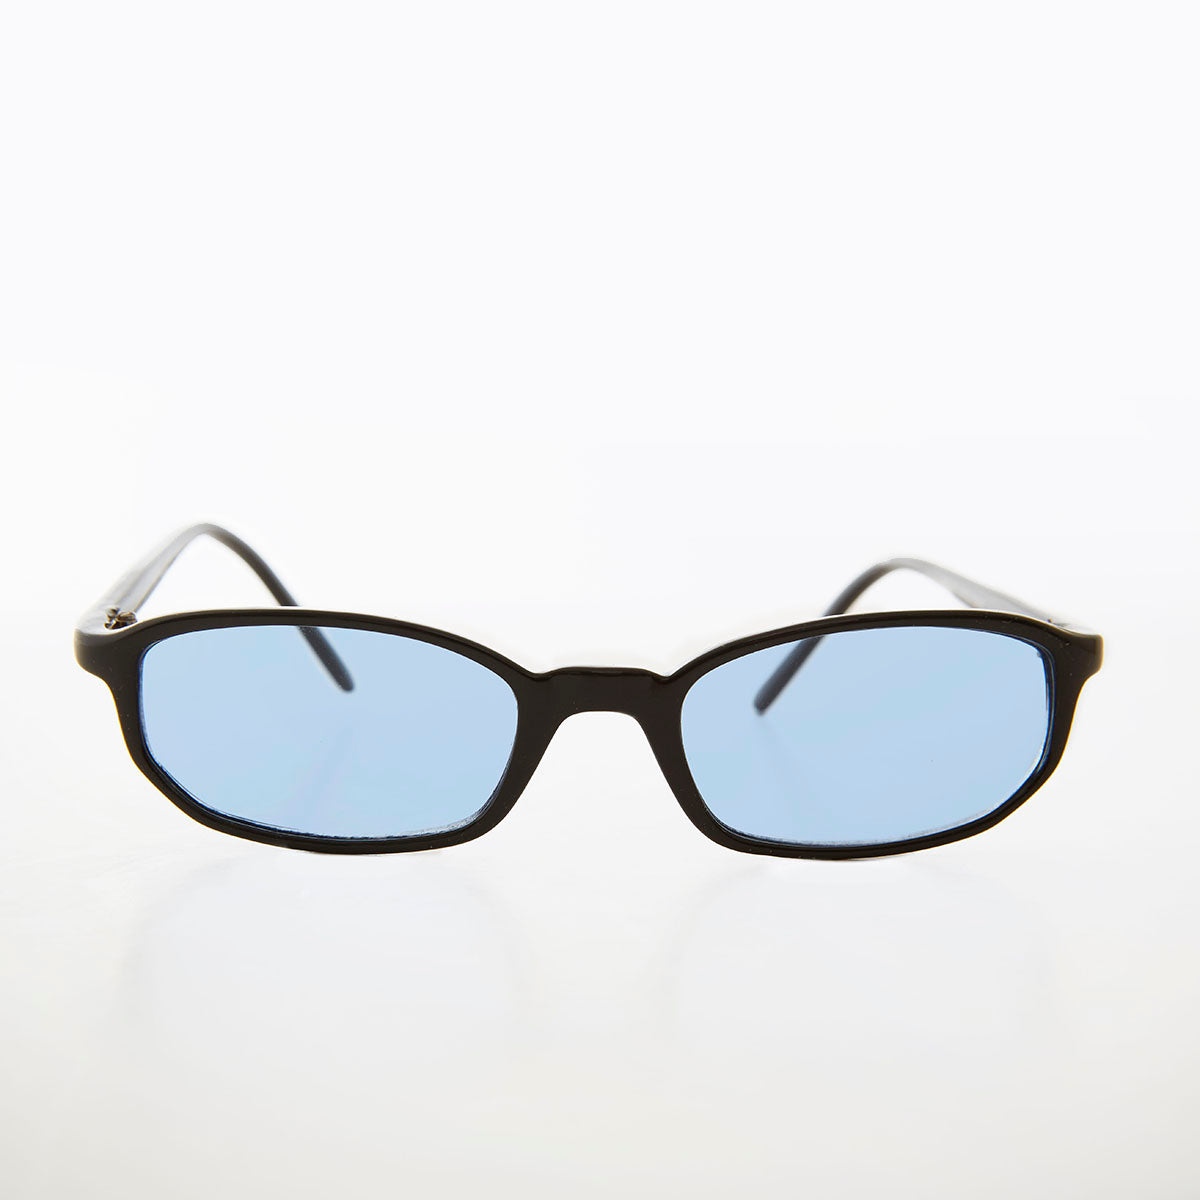 small rectangle black frame sunglasses with blue lenses